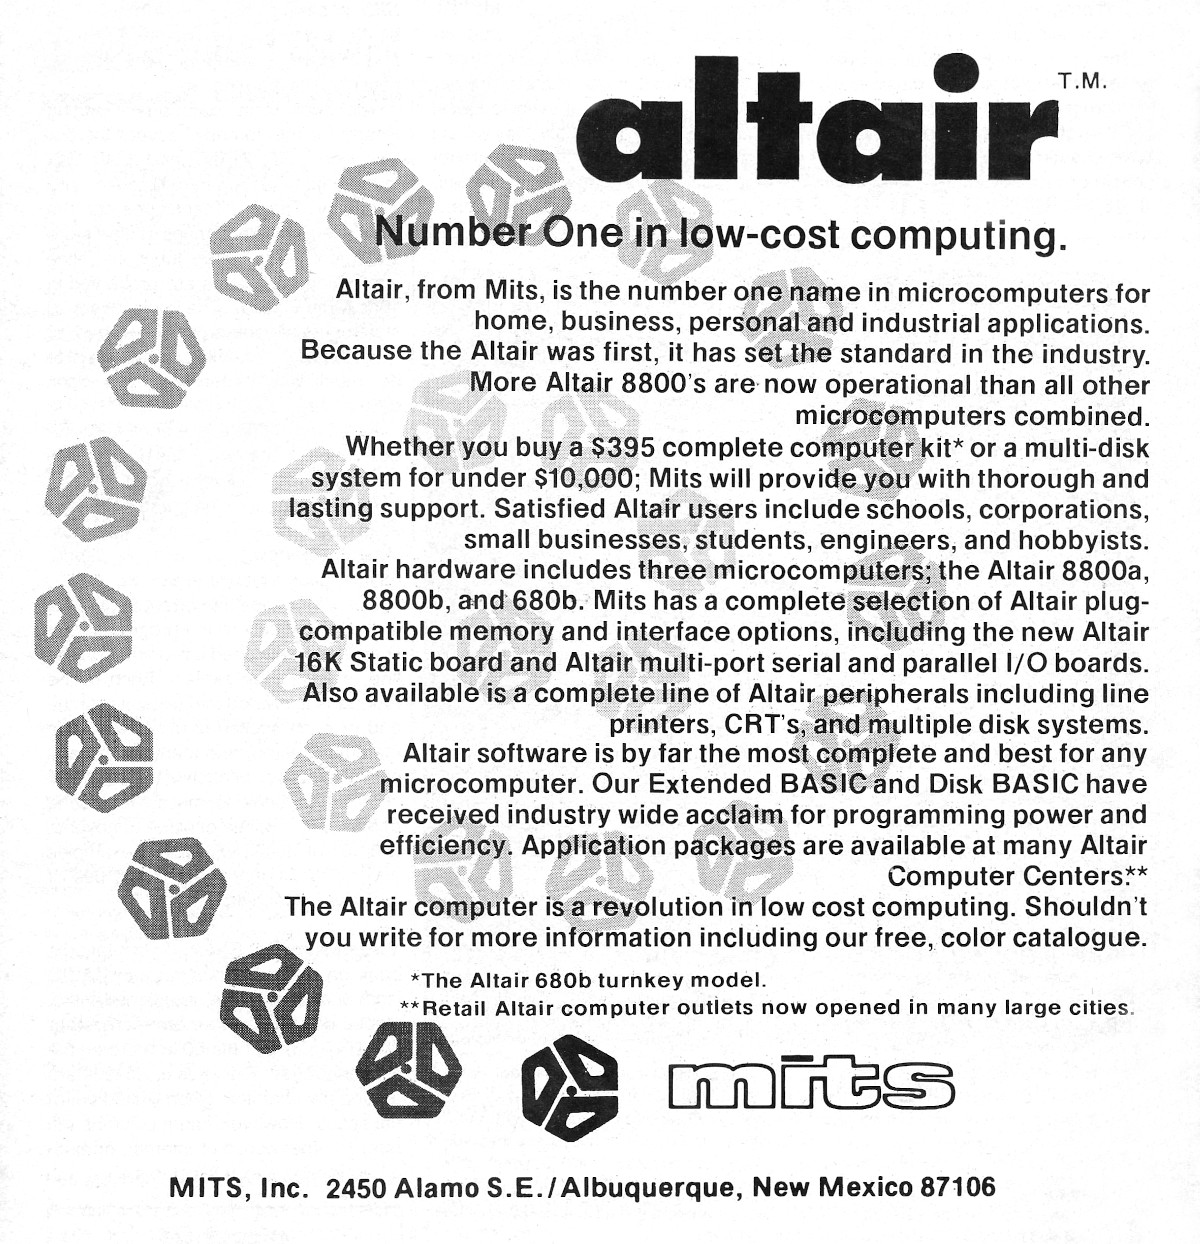 A text-heavy advert, primarily for the Altair, now branded as the 8800a, but also mentioning the 8800b version and the new 680b, based on the Motorola <span class='hilite'><span class='hilite'><span class='hilite'>6800</span></span></span>. Prices, as featured in the December 1976 edition of Popular Electronics, ranged from £395 for the 